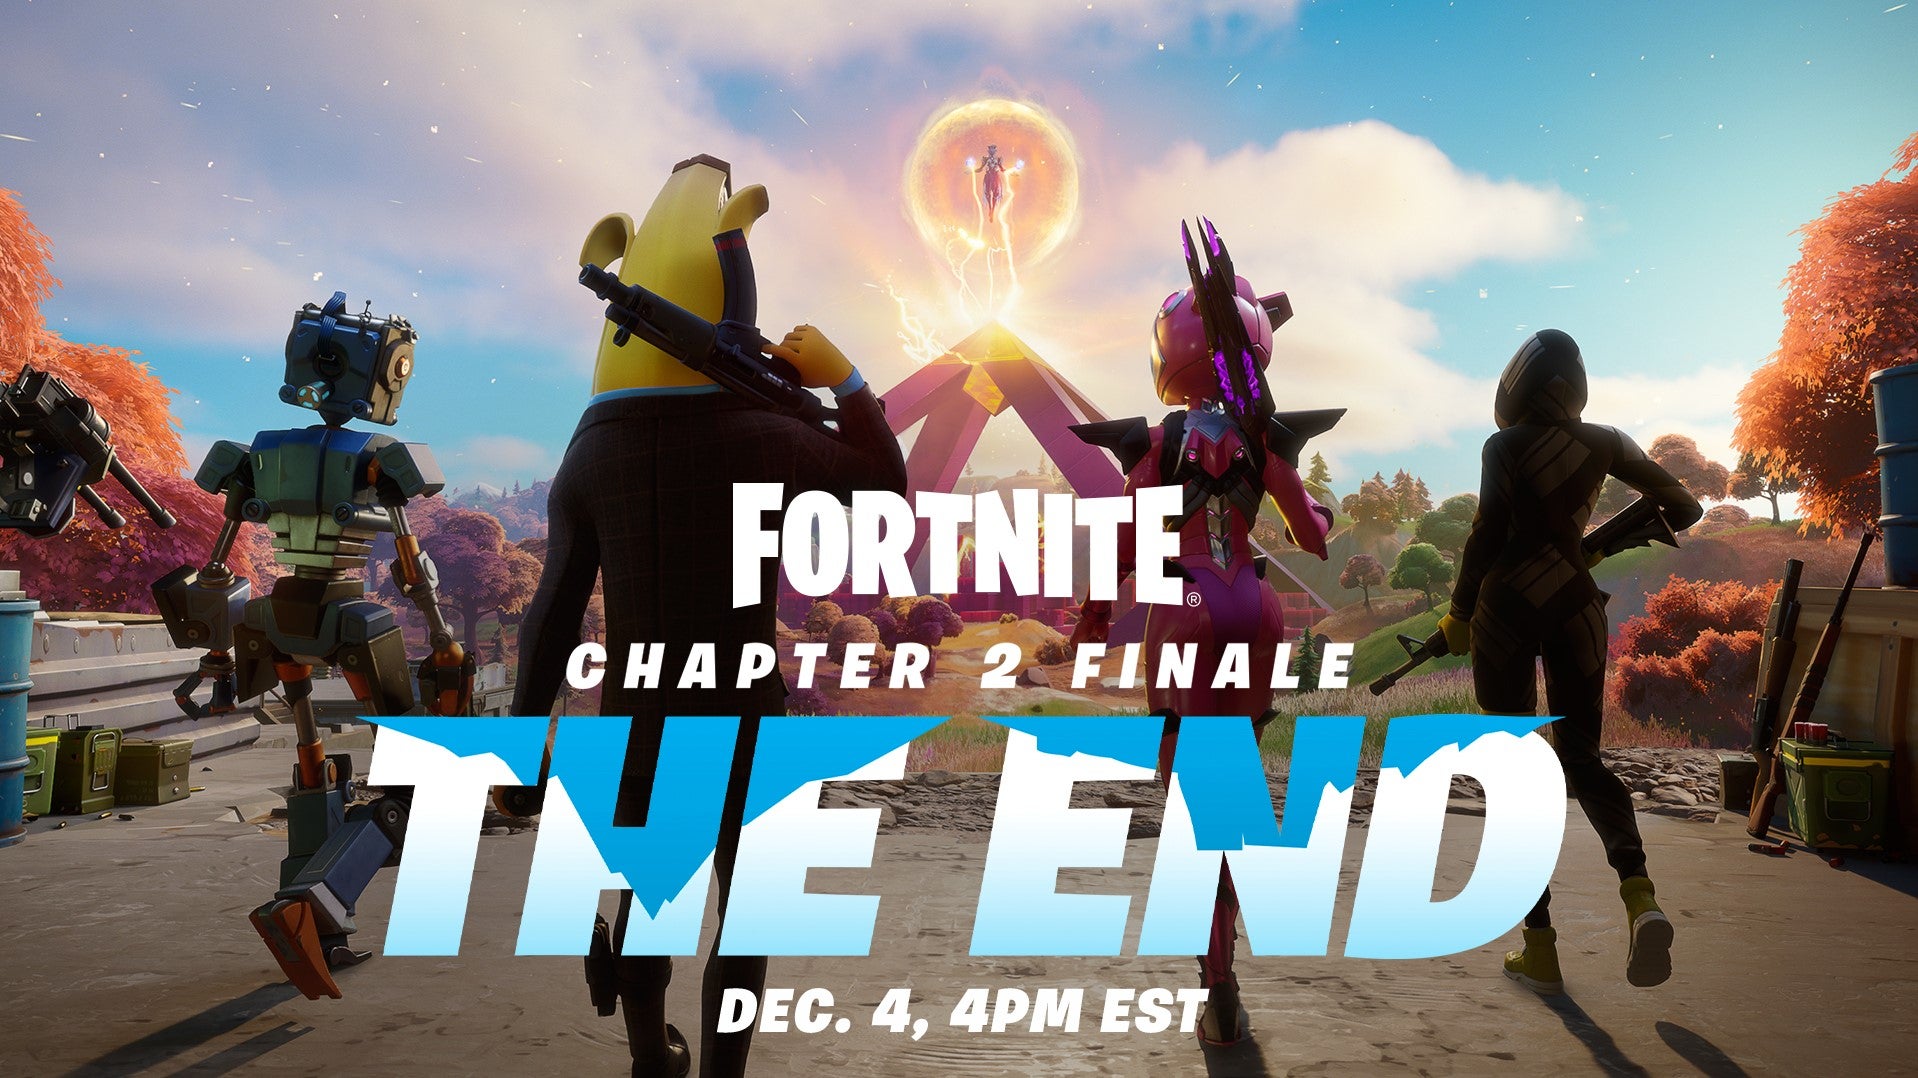 is the Fortnite Chapter 2 End' live | VG247